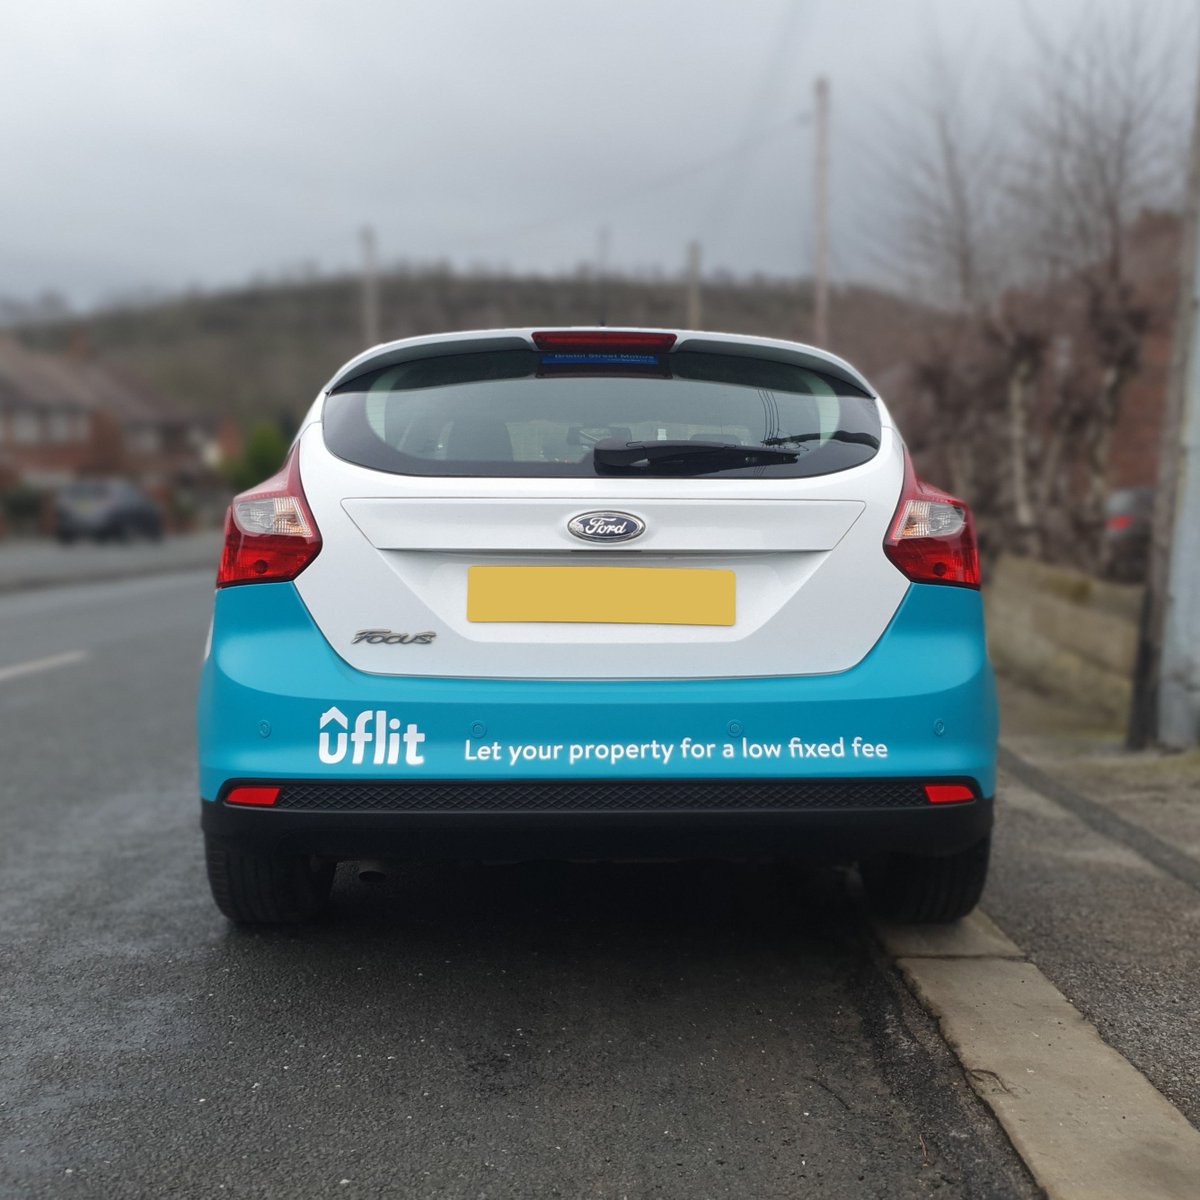 We recently had the pleasure of undertaking this partial wrap for @uflit's newest addition. This Focus features @hexisuk Skintac wrap film to match their branding and promote their property lettings business whilst out on the road. #RCGraphixLtd #EstateAgent #BarnsleyIsBrill